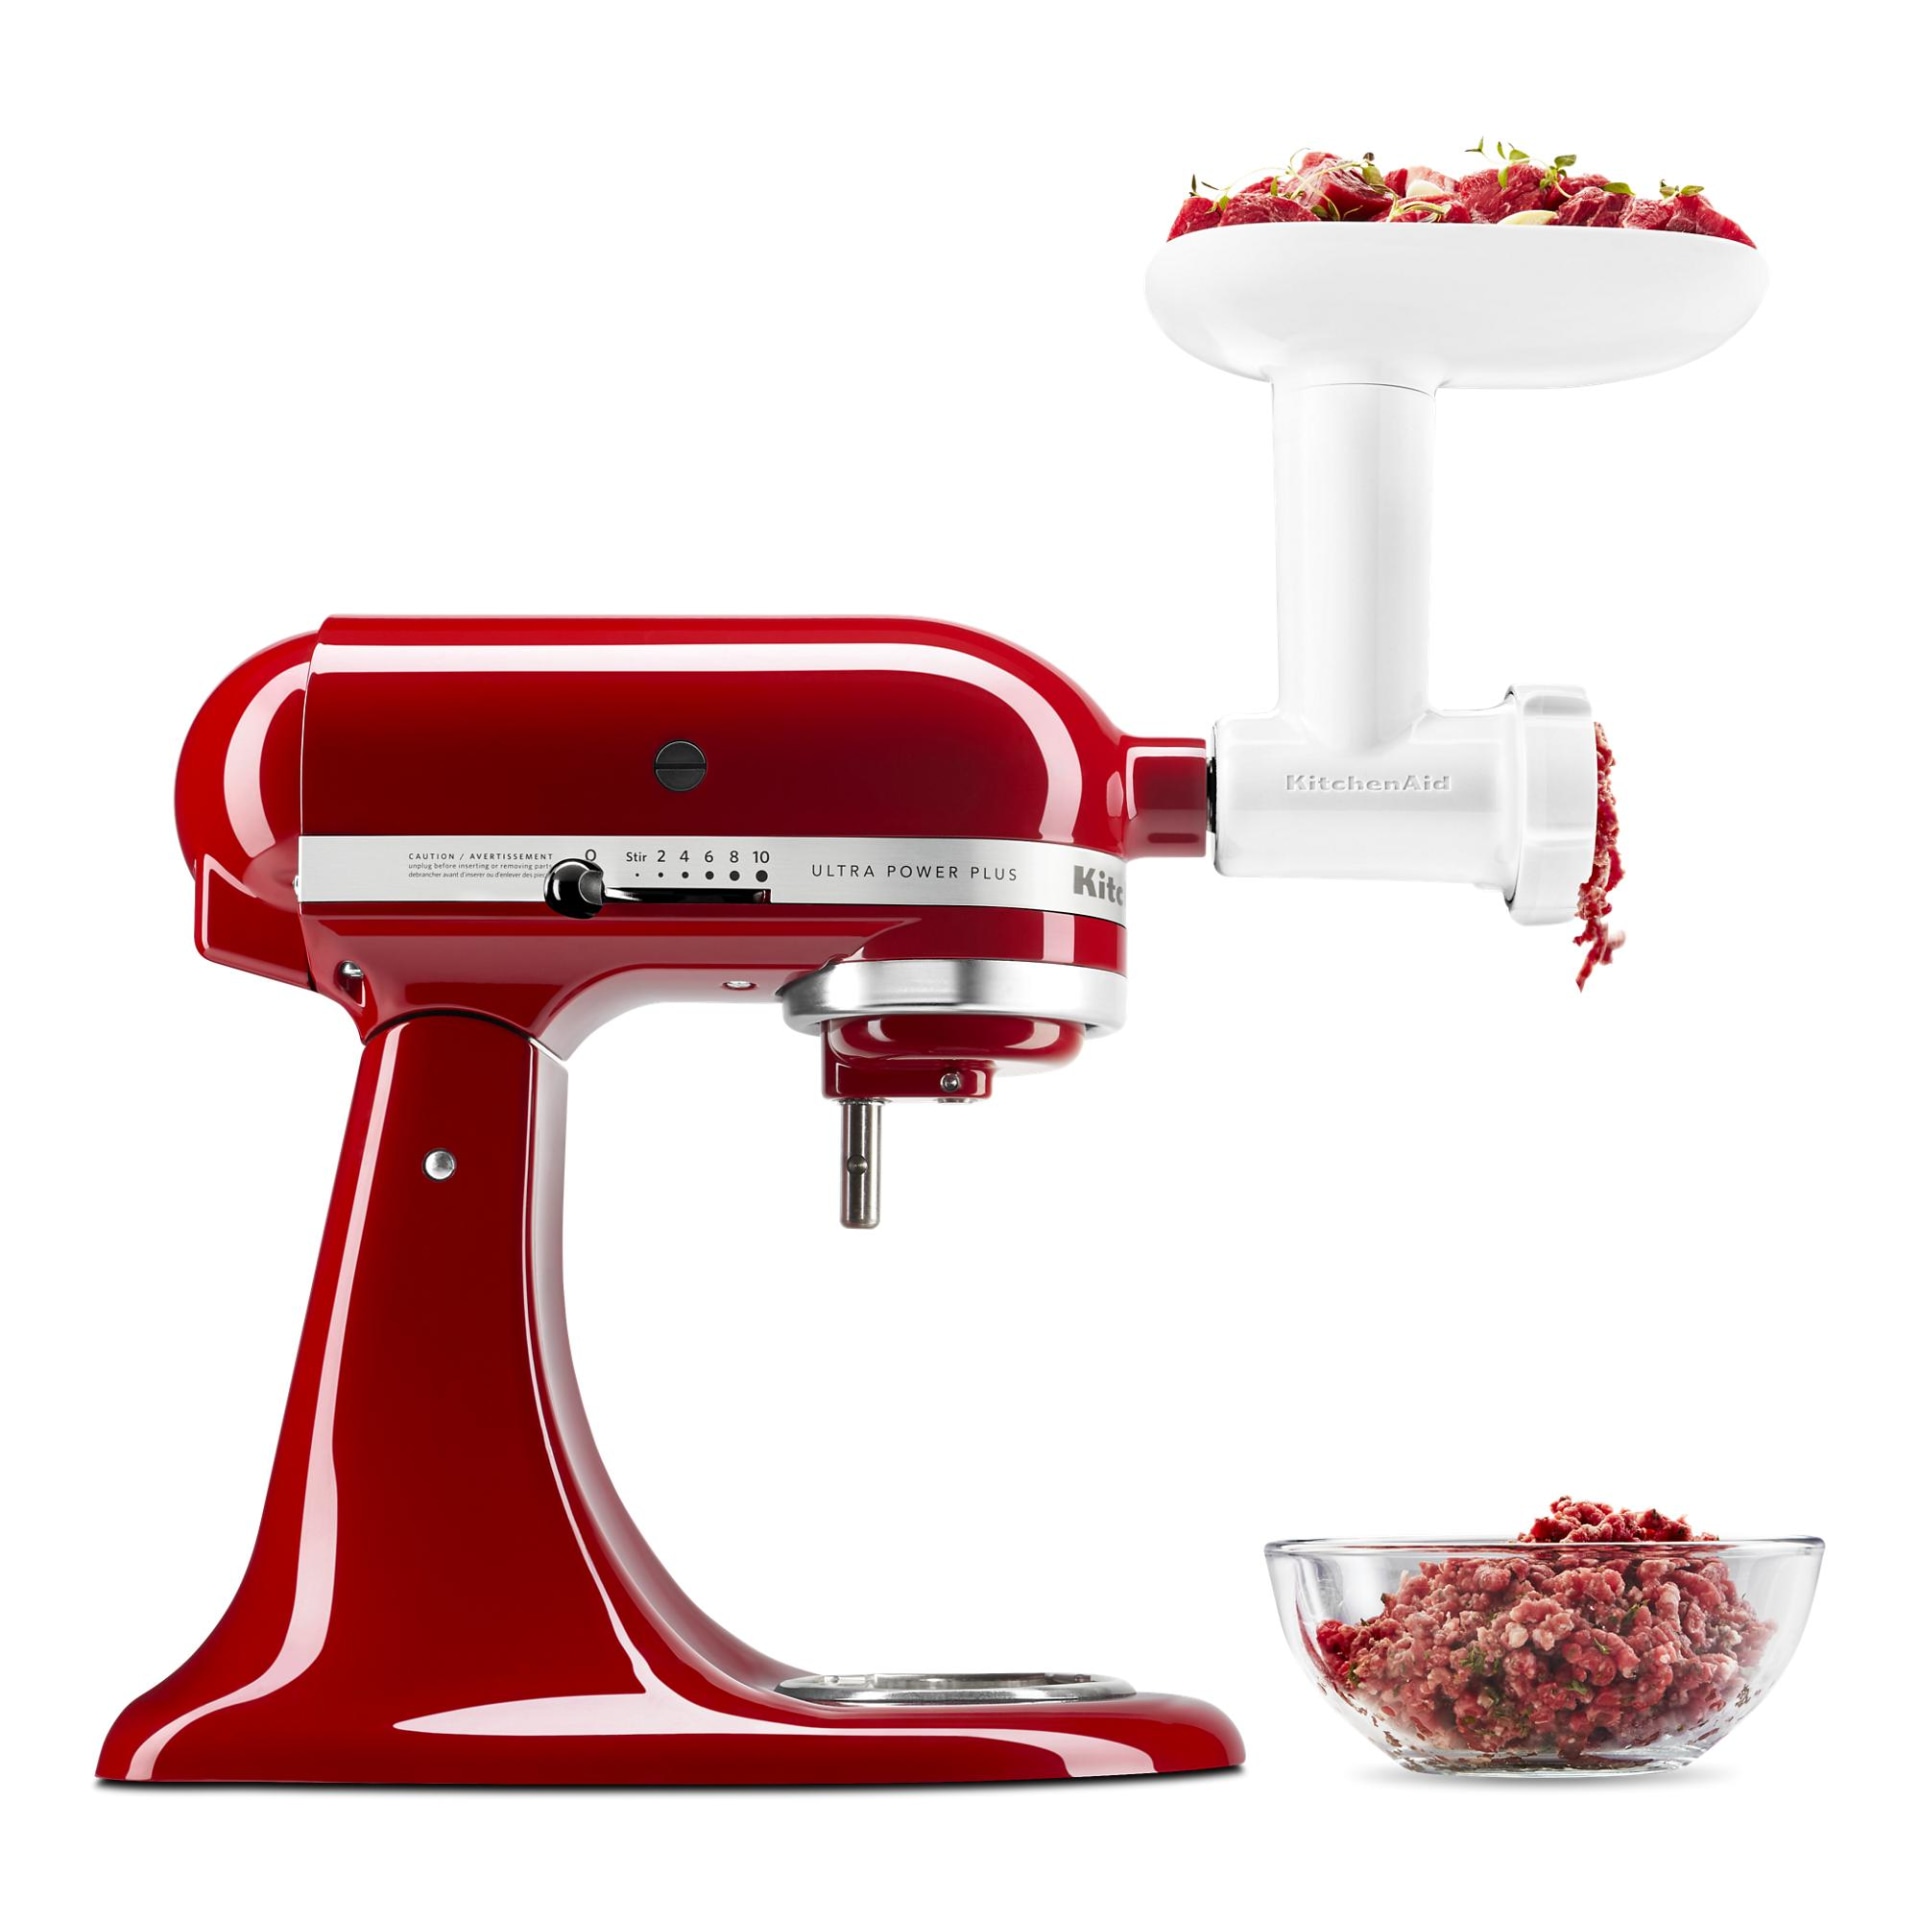 Food Grinder Attachment for Stand Mixer - WGSM300